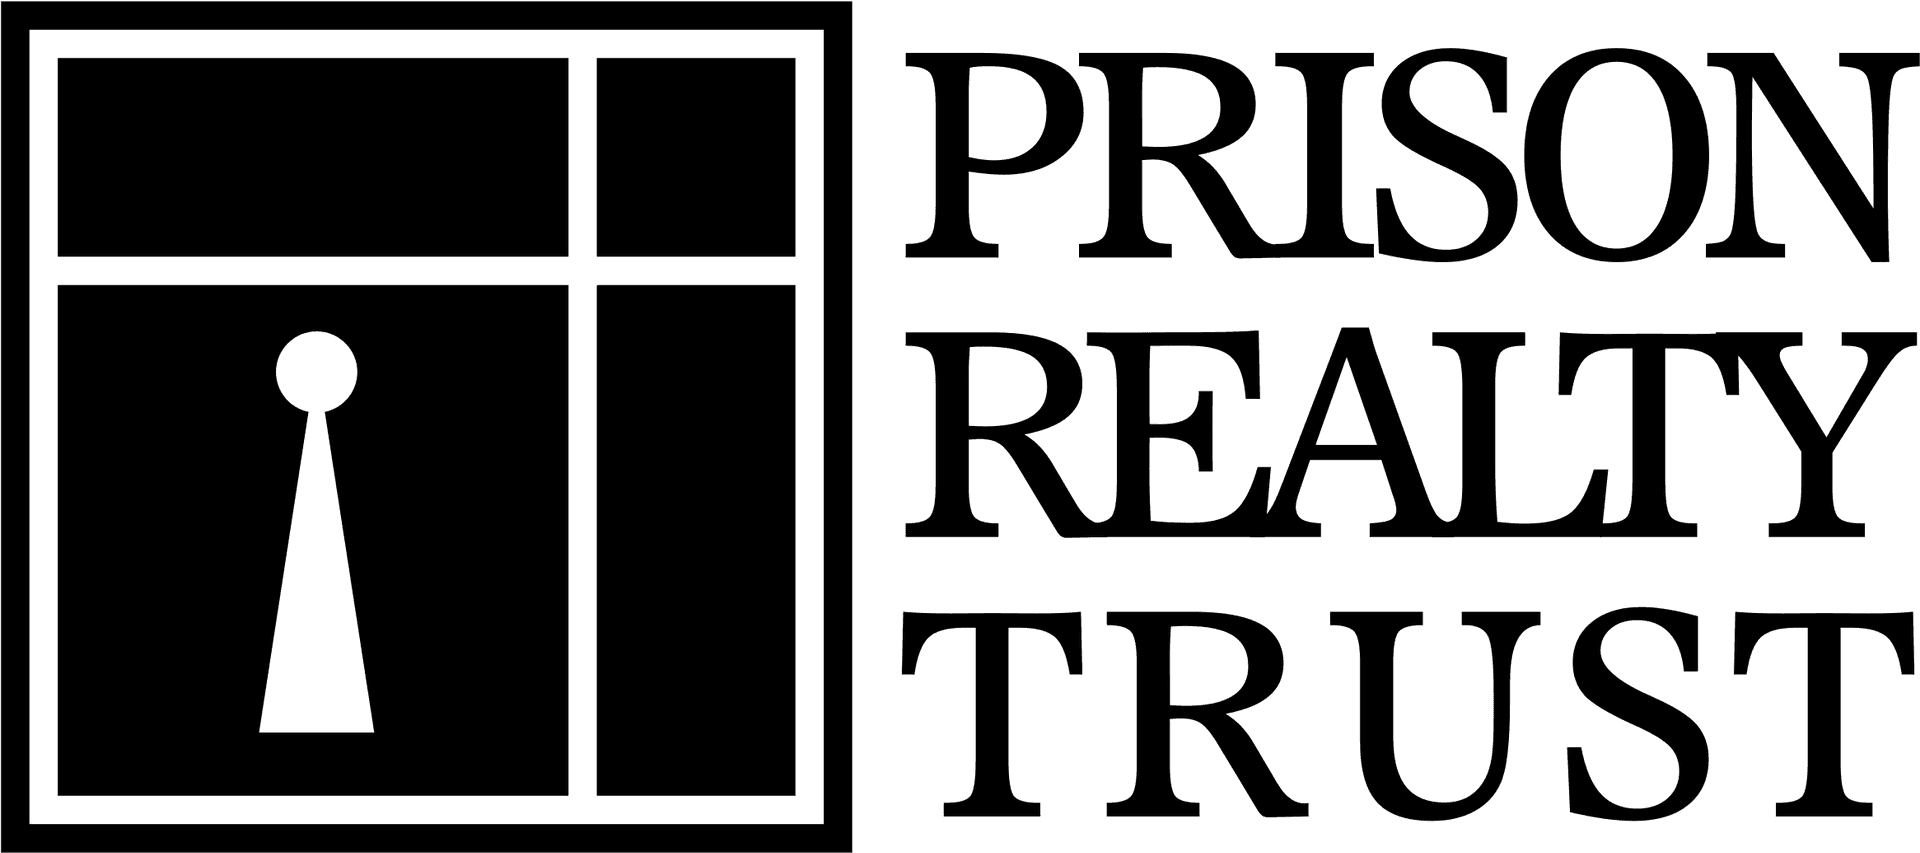 Prison Realty Trust Logo PNG image